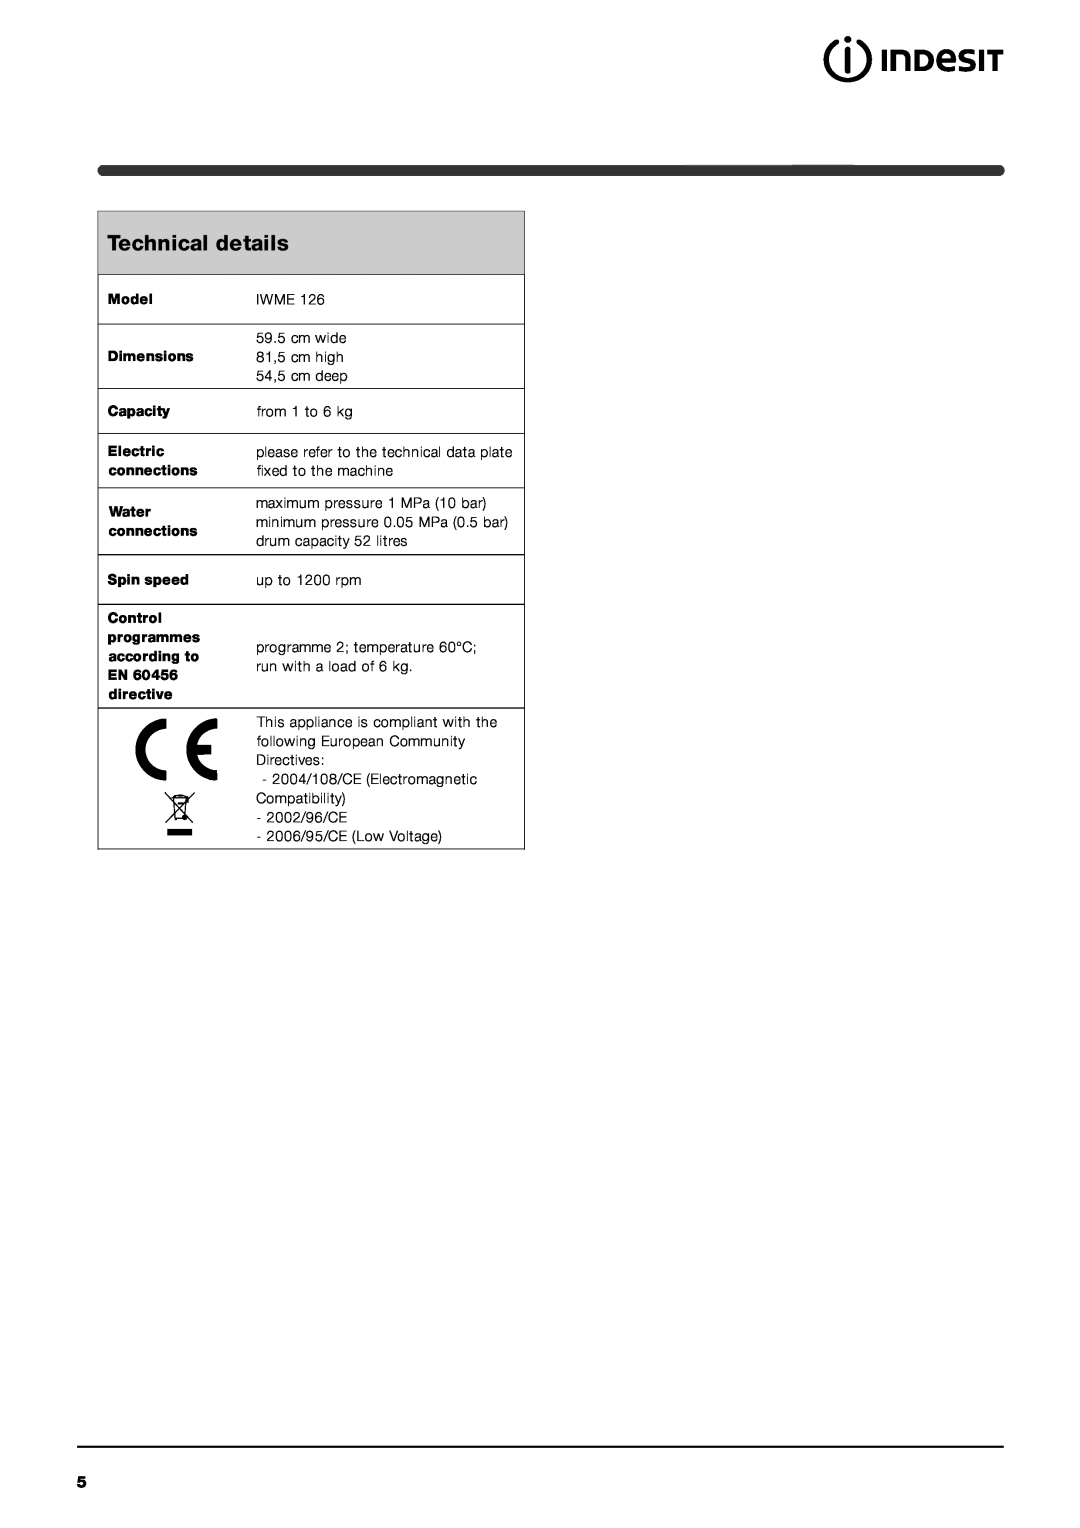 Indesit IWME 126 manual Technical details 